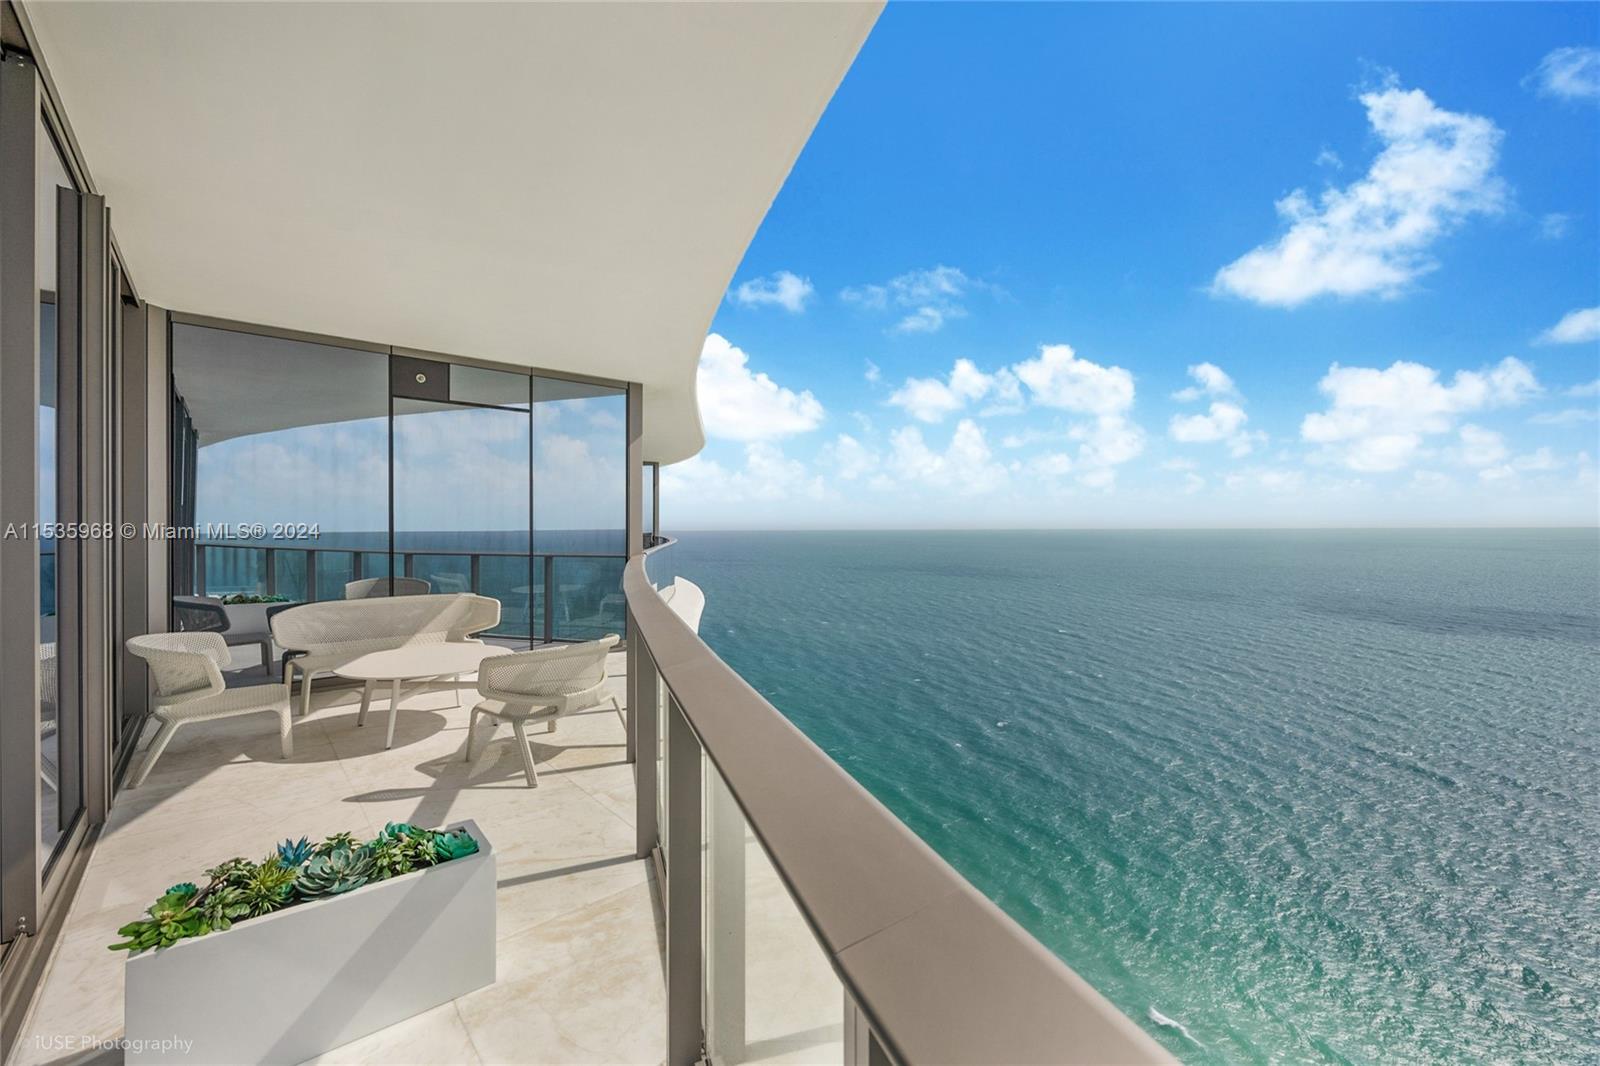 Exceptionally furnished residence with unobstructed views. This 2 bedroom, 2.5 bath unit is a spacious open flow-through plan boasting with ocean and intracoastal views. Modified
open-kitchen with top-of-the-line Gaggenau appliances. Enjoy panoramic sunrise & sunset views from two terraces. Amenities include a sky lounge exclusively for residents, 2
pools, fitness center, guest suites, restaurant, beach service and 250 linear feet of pristine beachfront. Hospitality provided by the incomparable Ritz-Carlton! Unit will be delivery
fully finished!!!